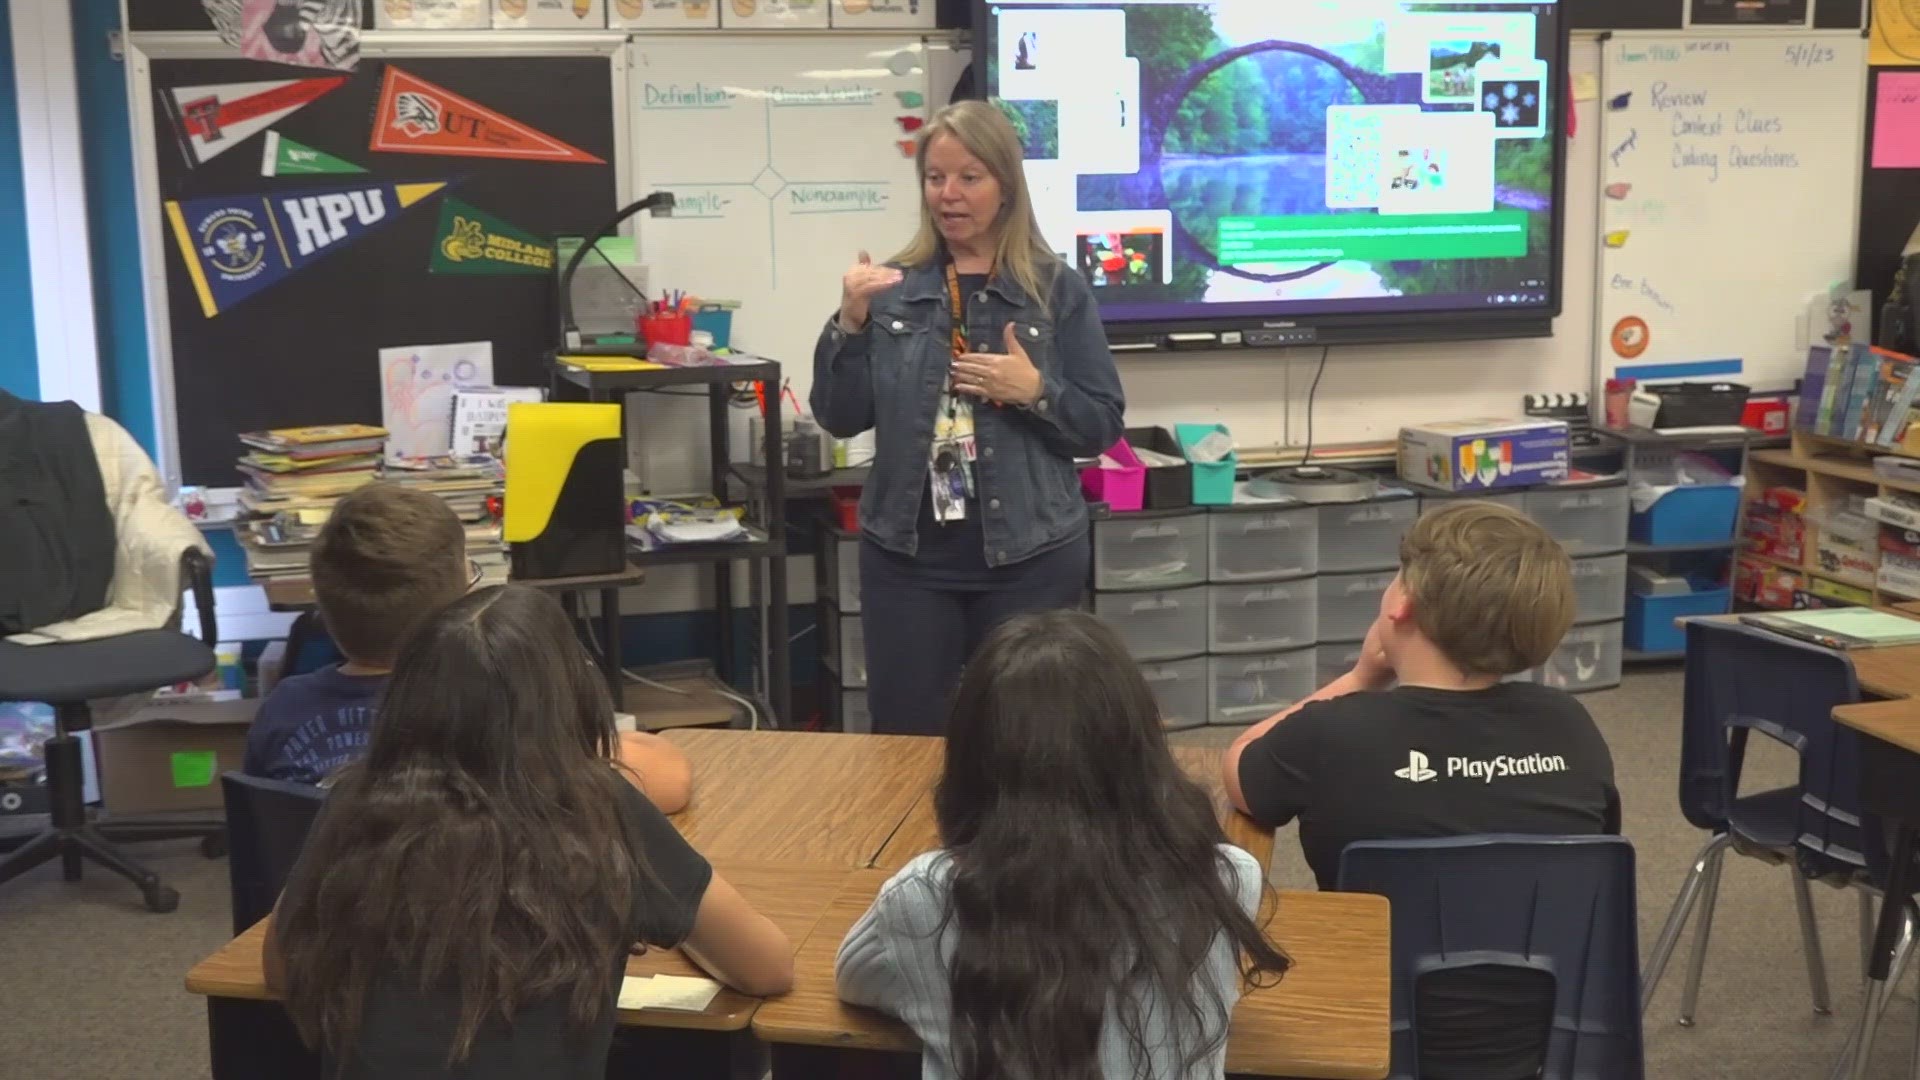 Valarie Shreves is taking advantage of available technology. Her efforts developing personalized learning and blended learning strategies will impact ECISD.